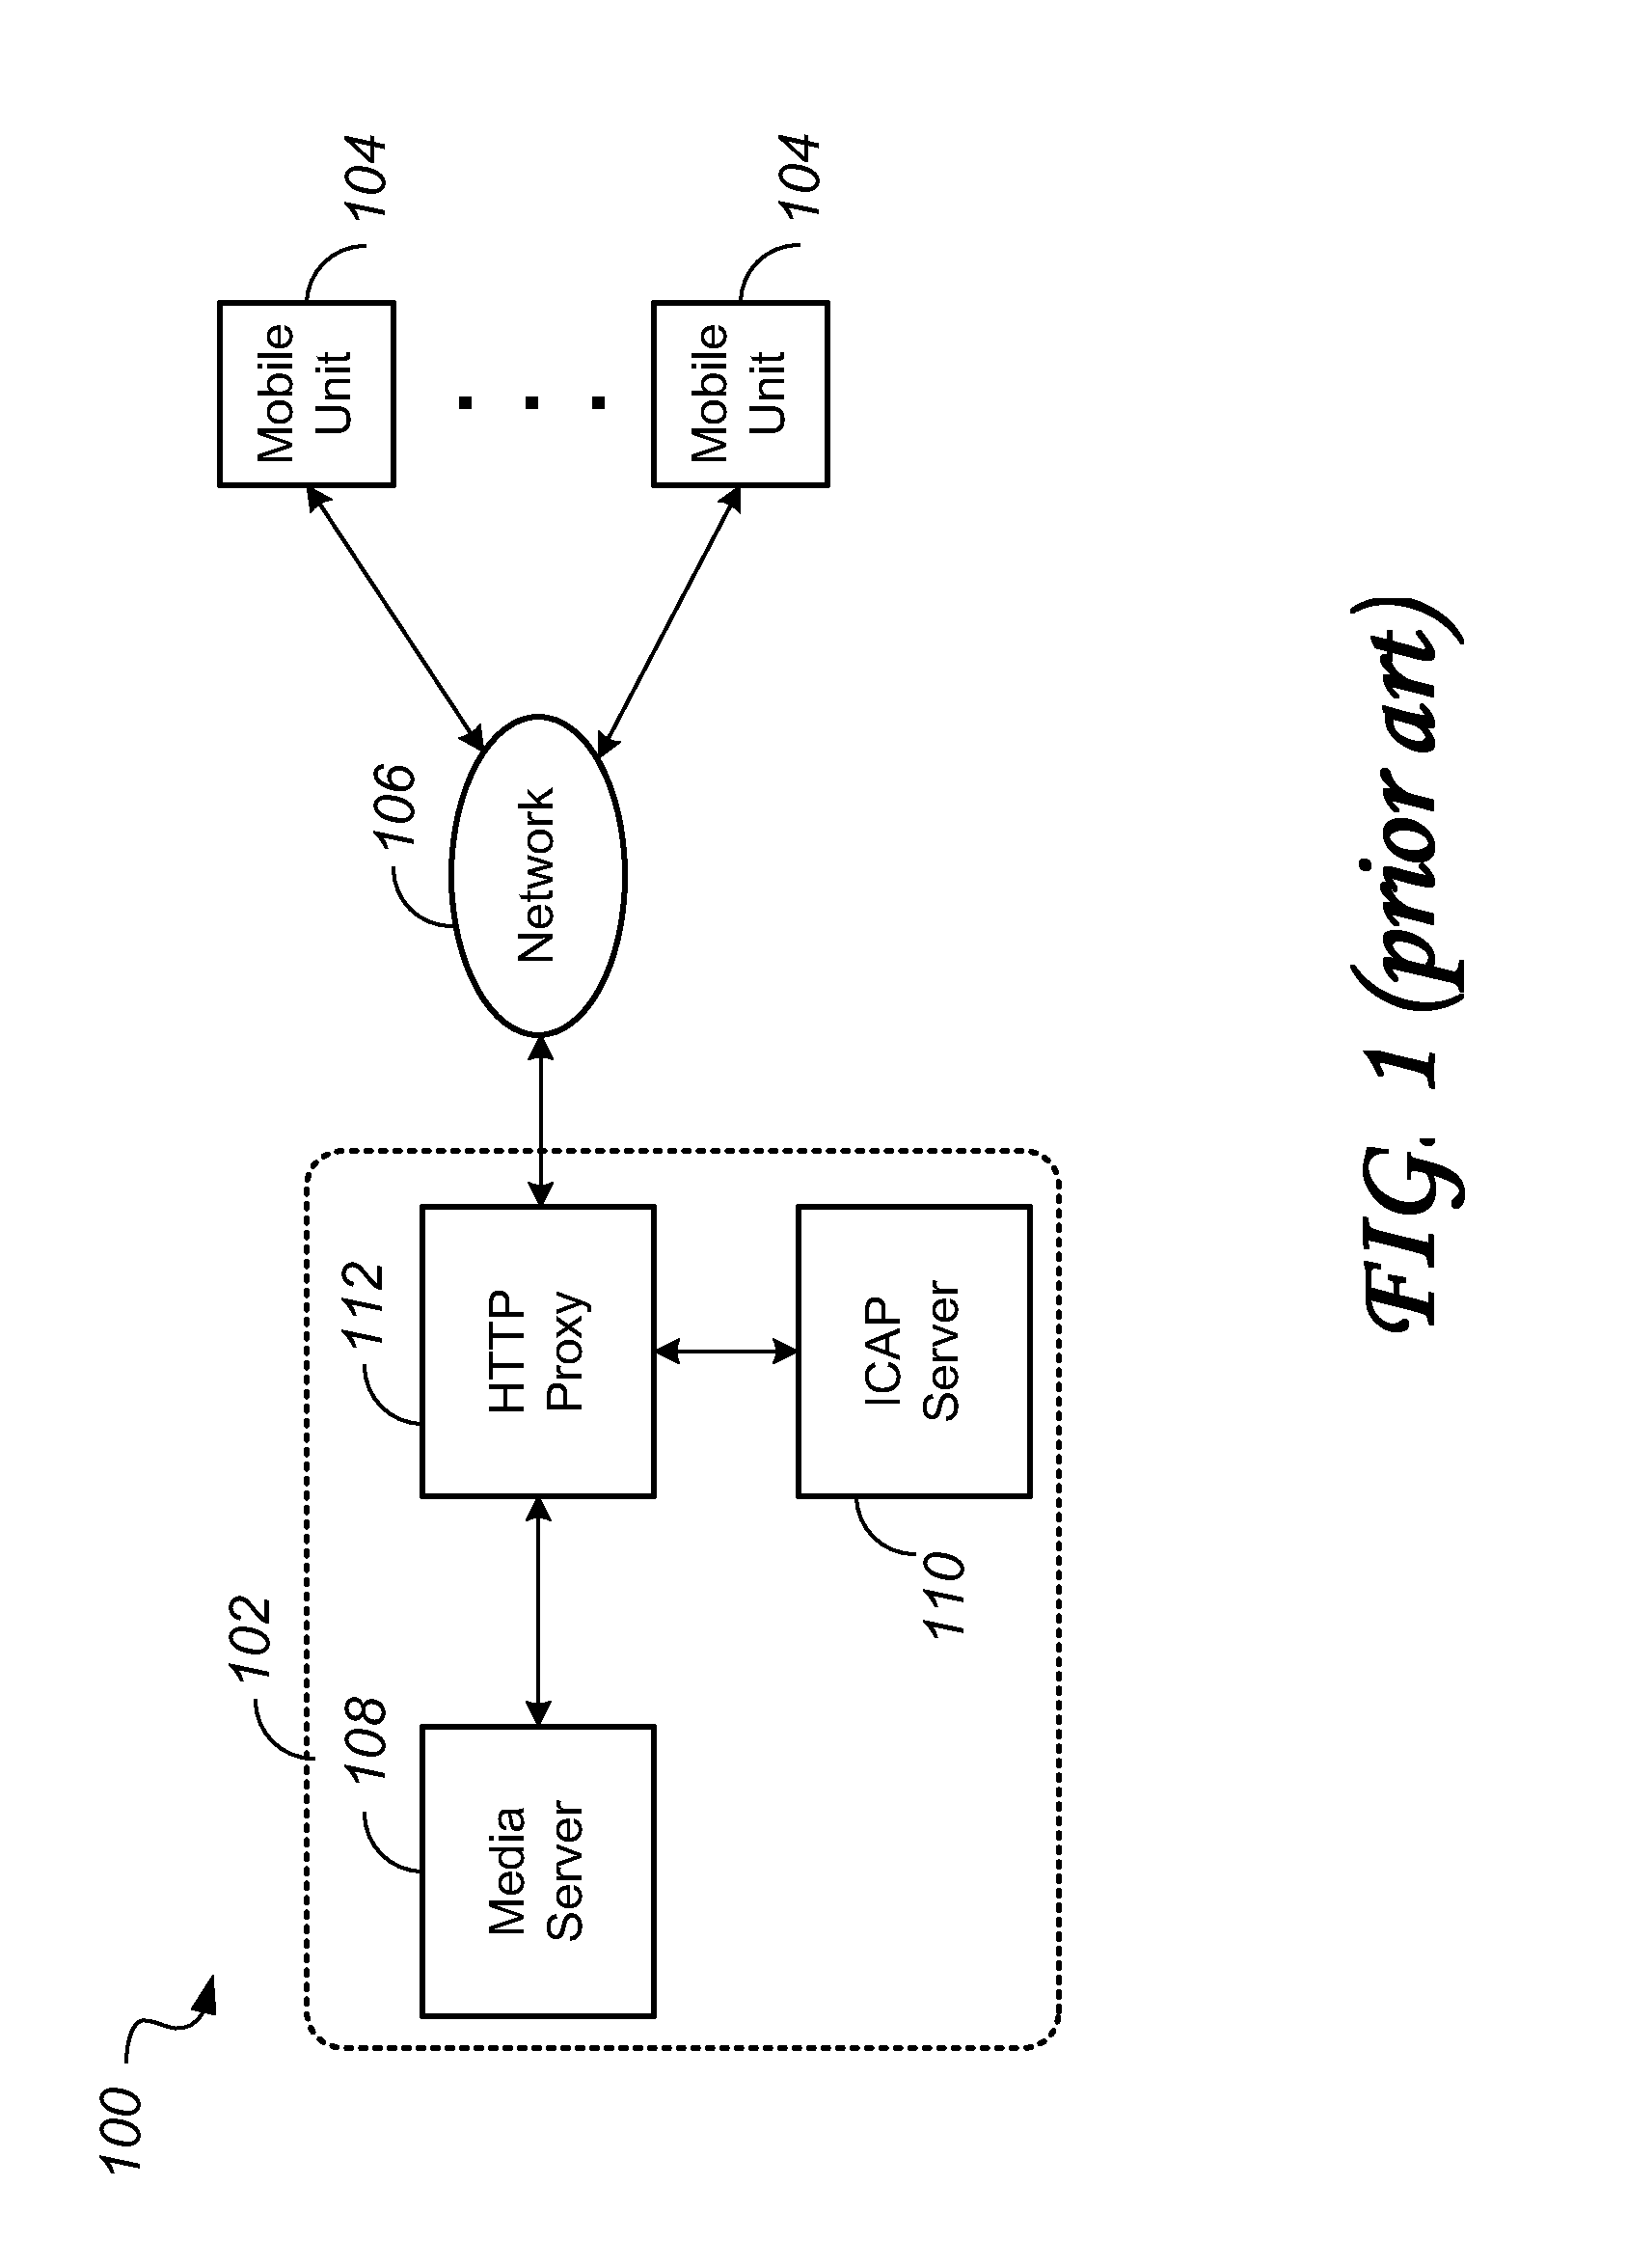 Dynamic bit rate adaptation over bandwidth varying connection